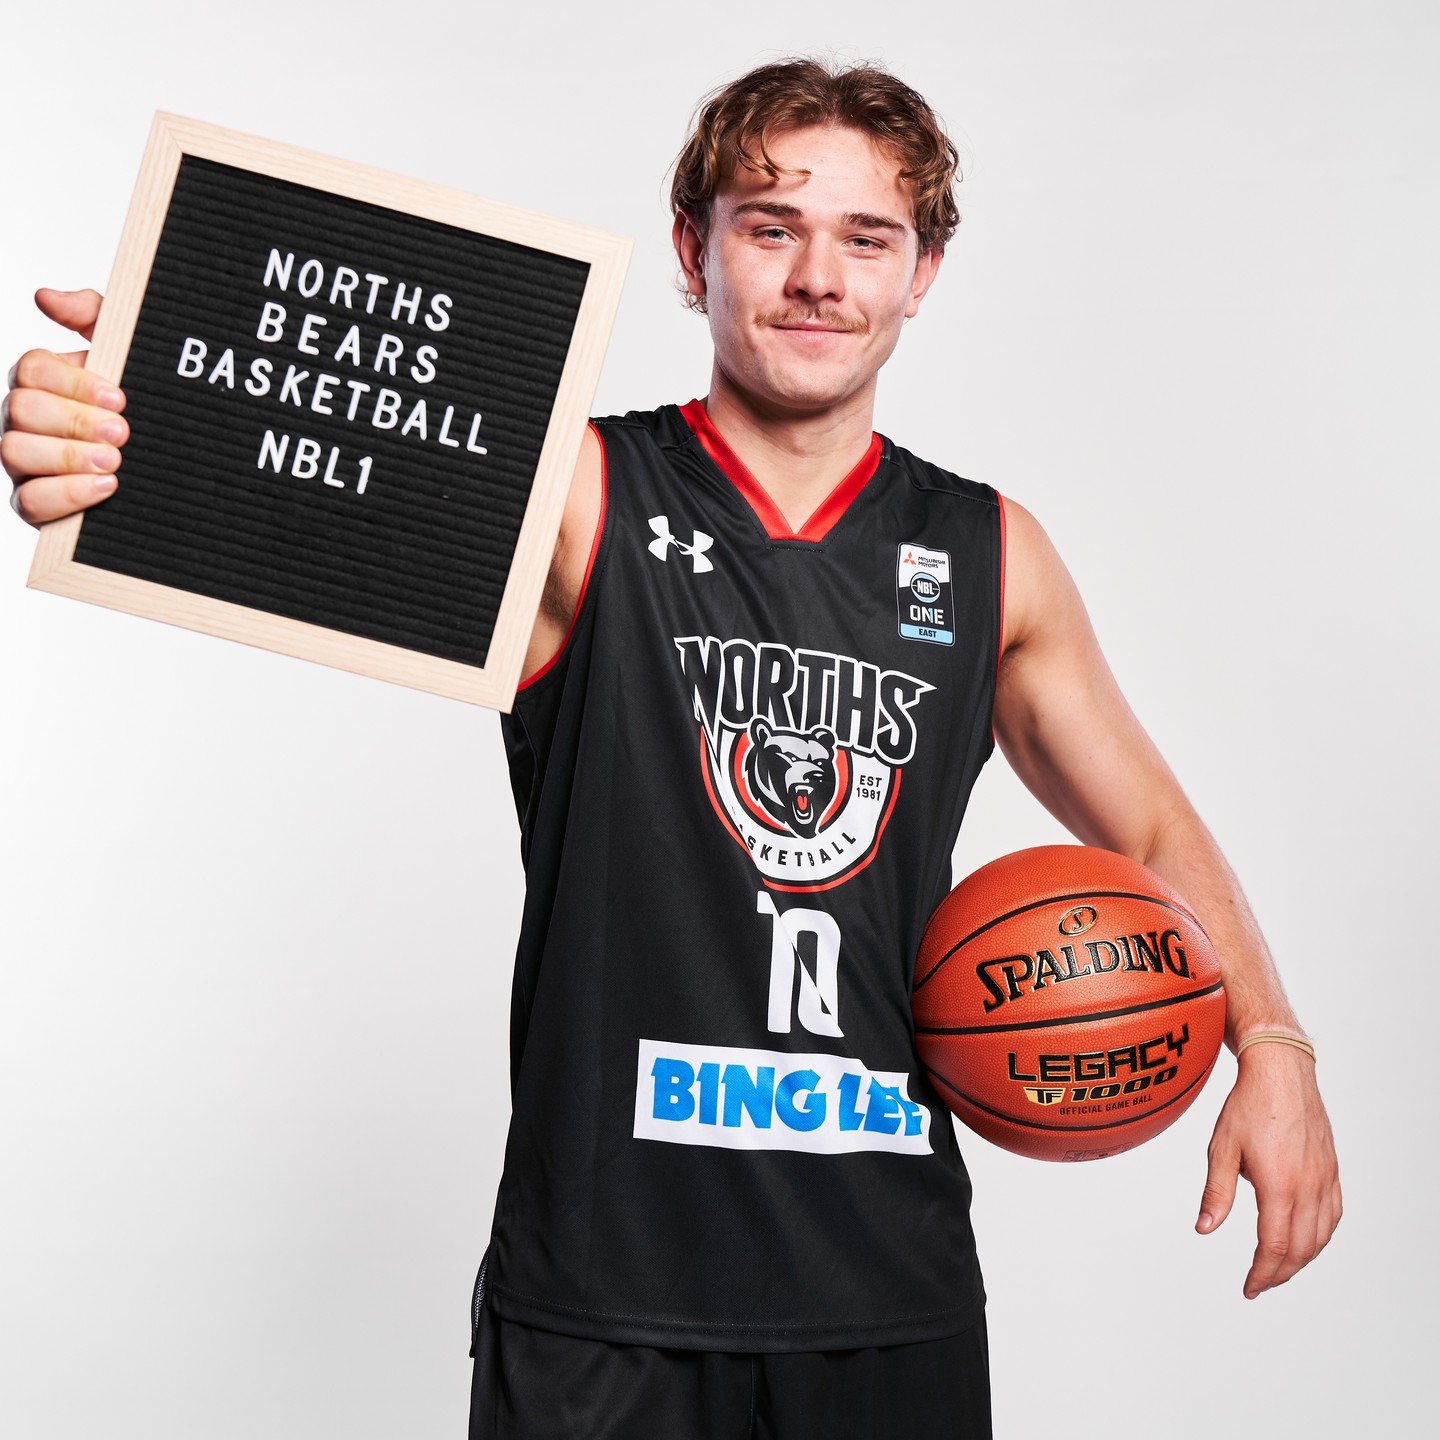 NBL1 EAST | ROUND 5 🏀

Join us this Saturday, May 4th, at The Bear Cave as both of our Bing Lee Norths Bears NBL1 teams gear up for a home clash against the Inner West Bulls in what promises to be an intense weekend of basketball.

The excitement be